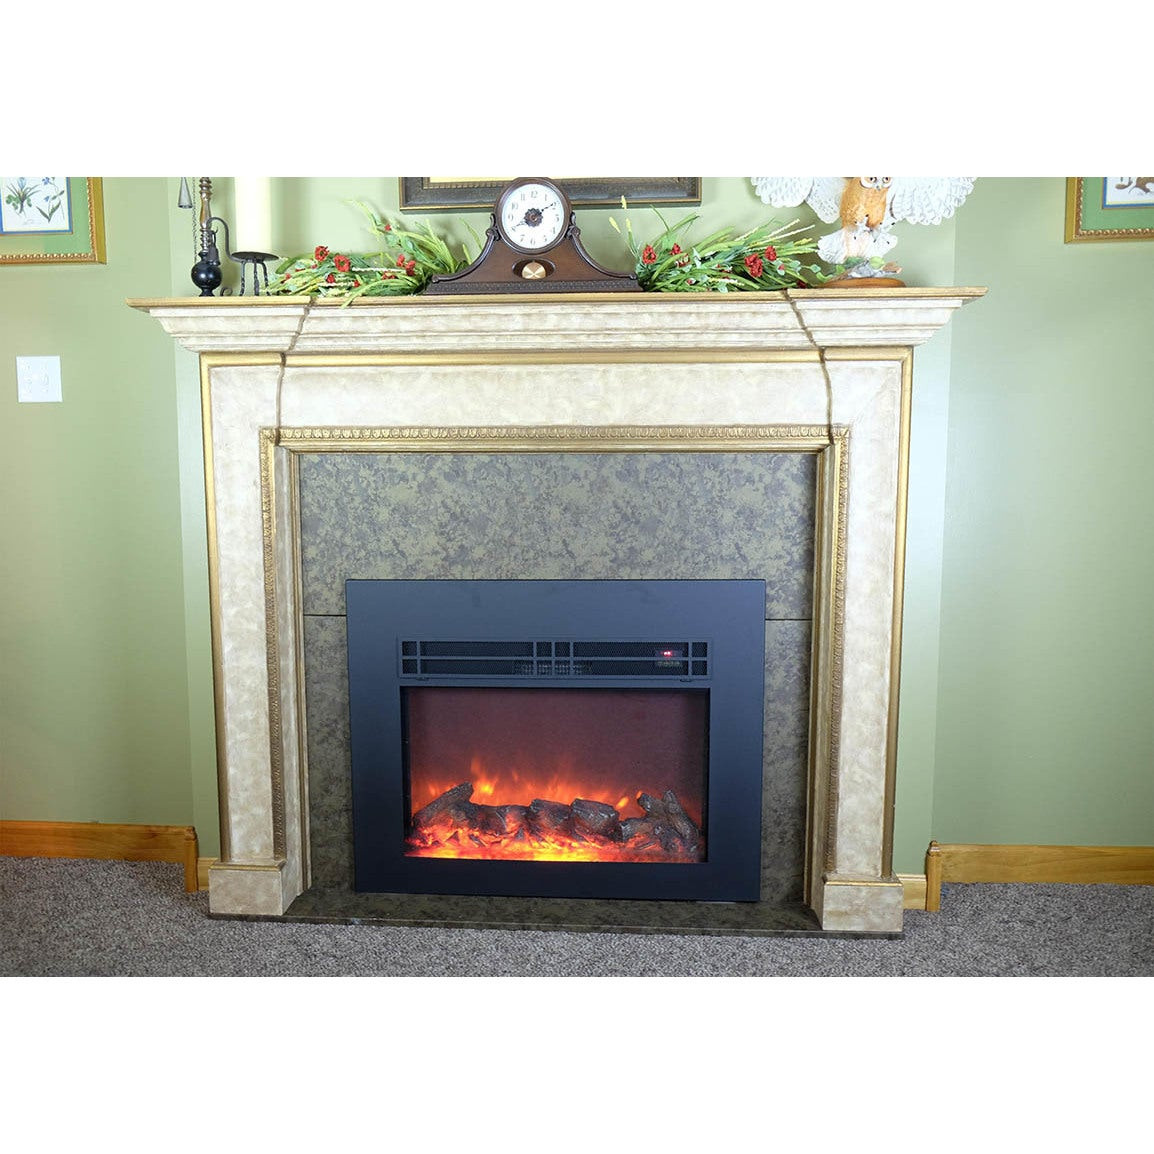 Decor Flame Electric Fireplace Manual
 Y Decor True Flame electric fireplace insert 30" with